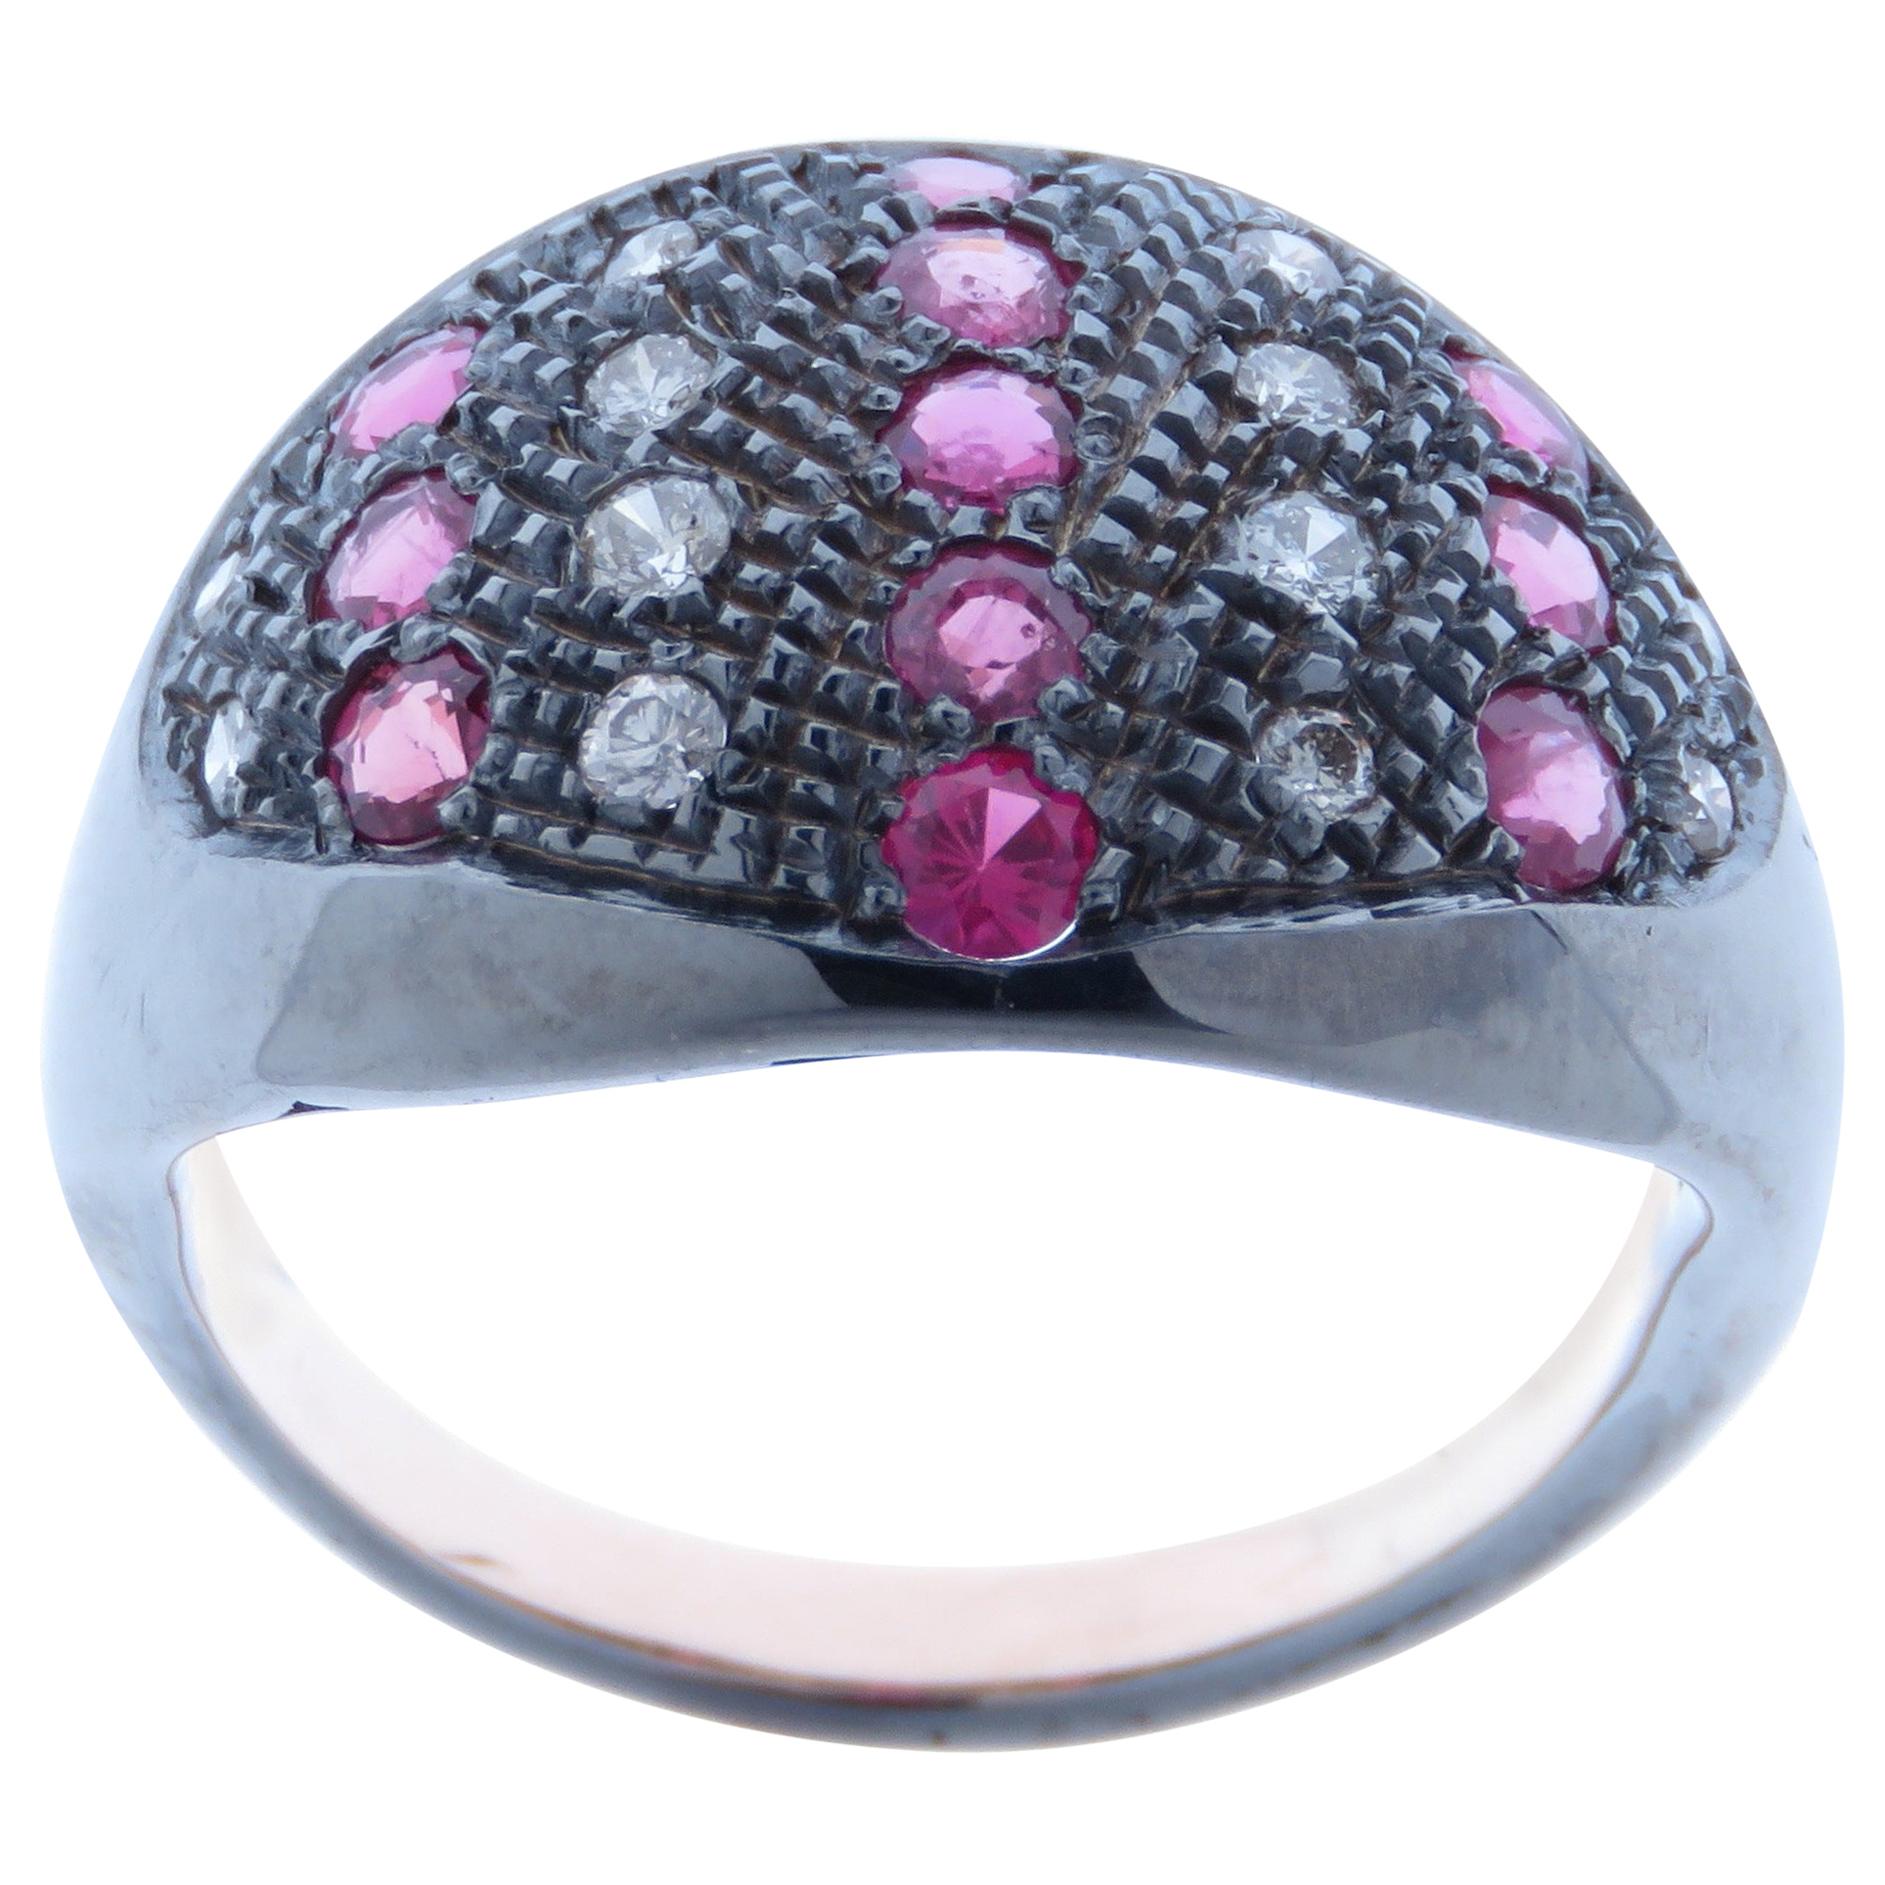 Diamonds Rubies Dome Ring Handcrafted in Italy by Botta Gioielli